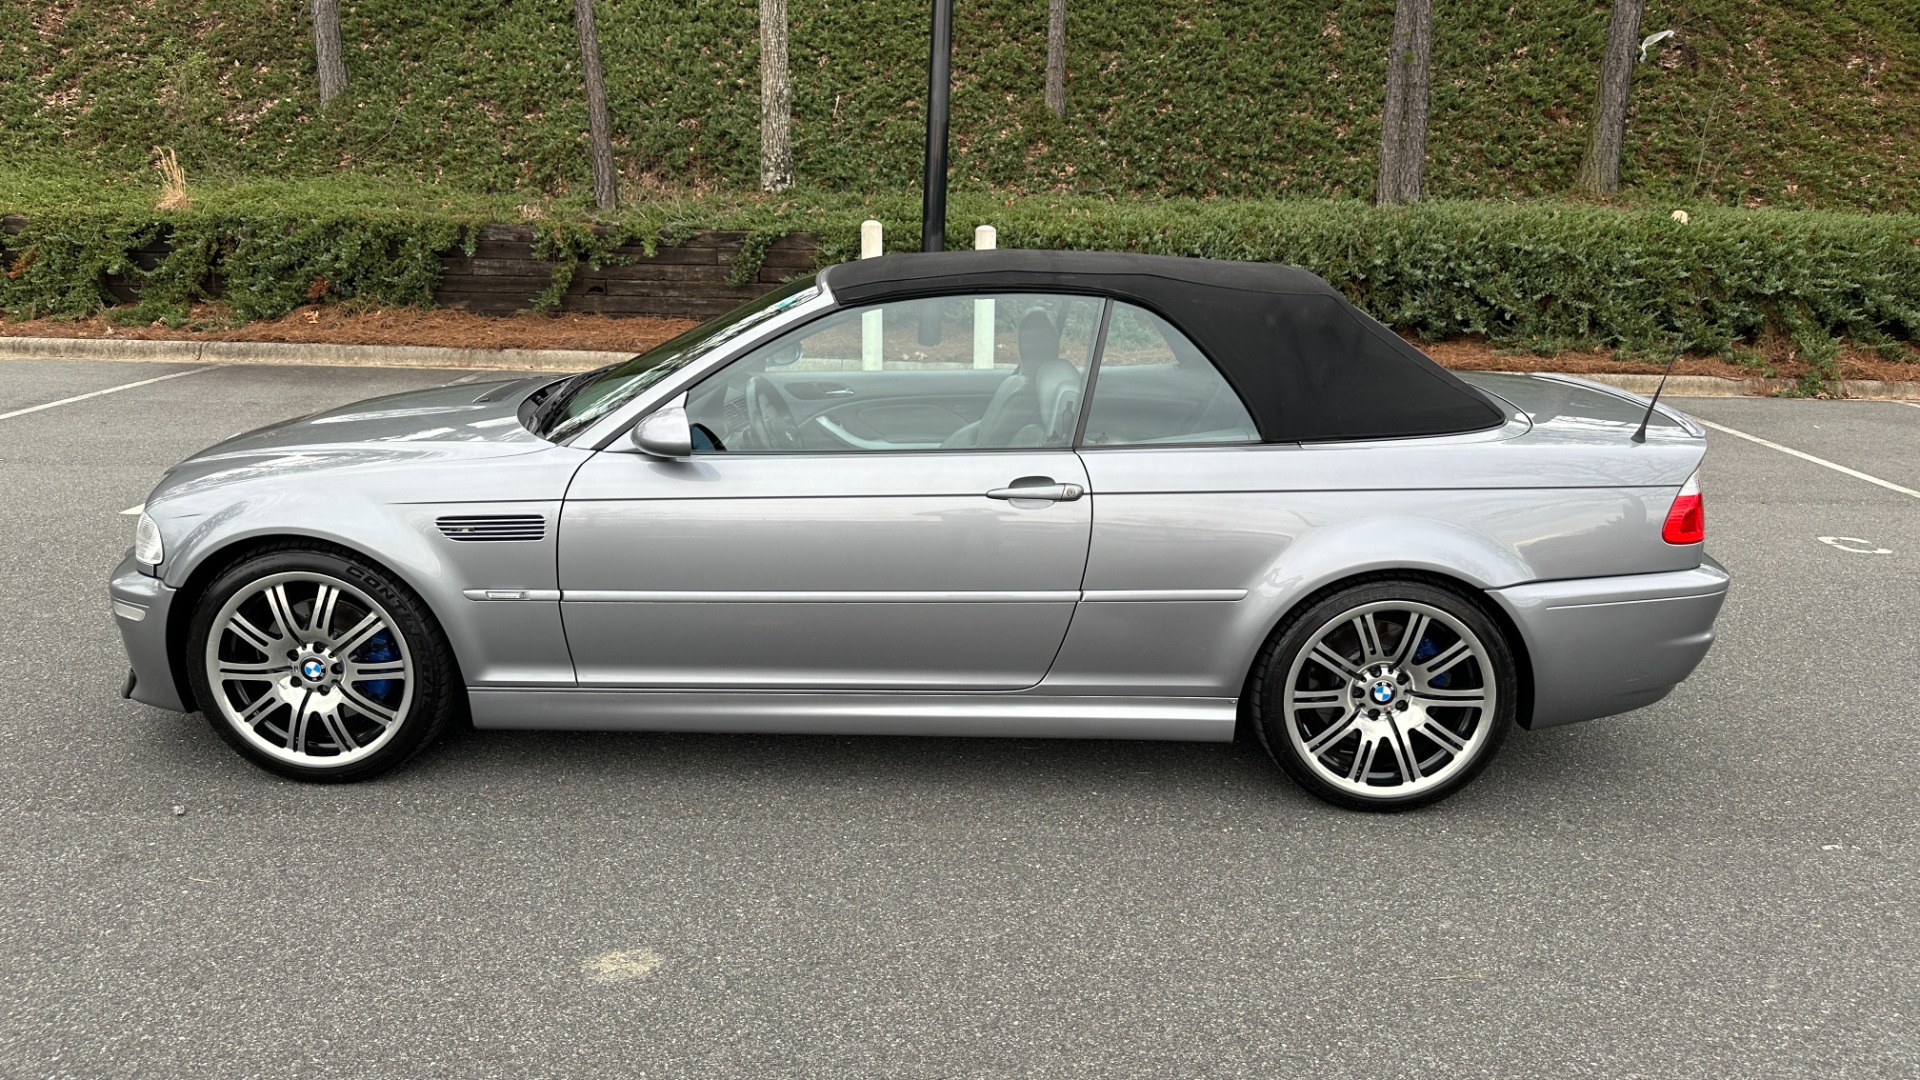 Used 2006 BMW M3 CONVERTIBLE / SMG AUTO / LEATHER / INLINE 6CYL / CARBON FIBER for sale $24,995 at Formula Imports in Charlotte NC 28227 37